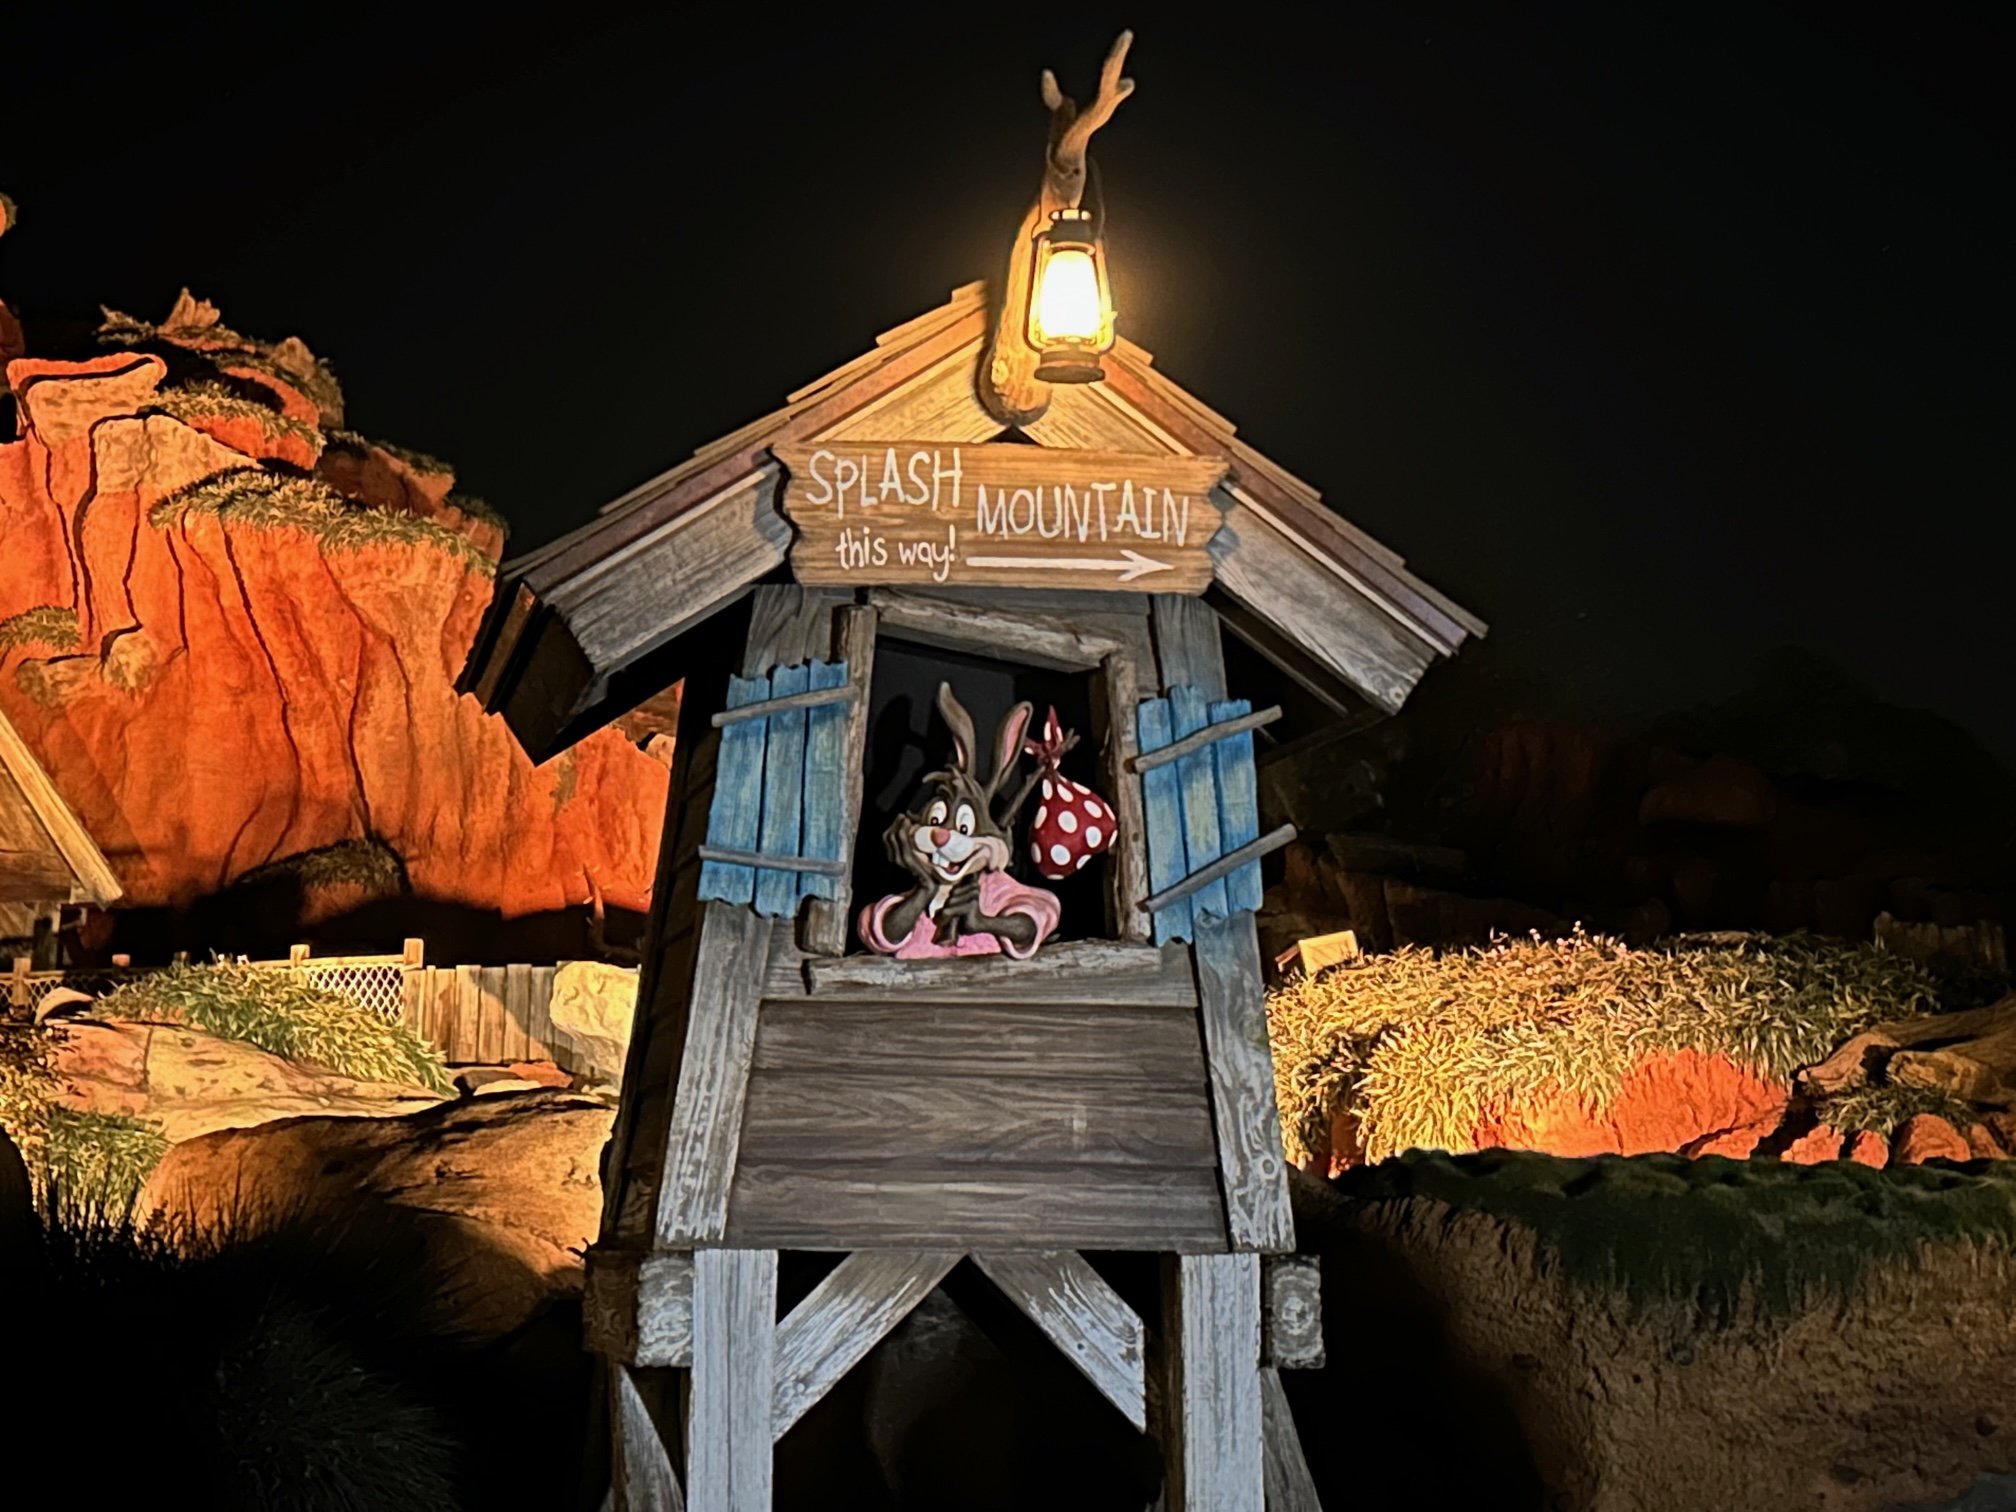 Scenes from the final night of operation of Splash Mountain at Magic Kingdom: Jan. 22, 2023.